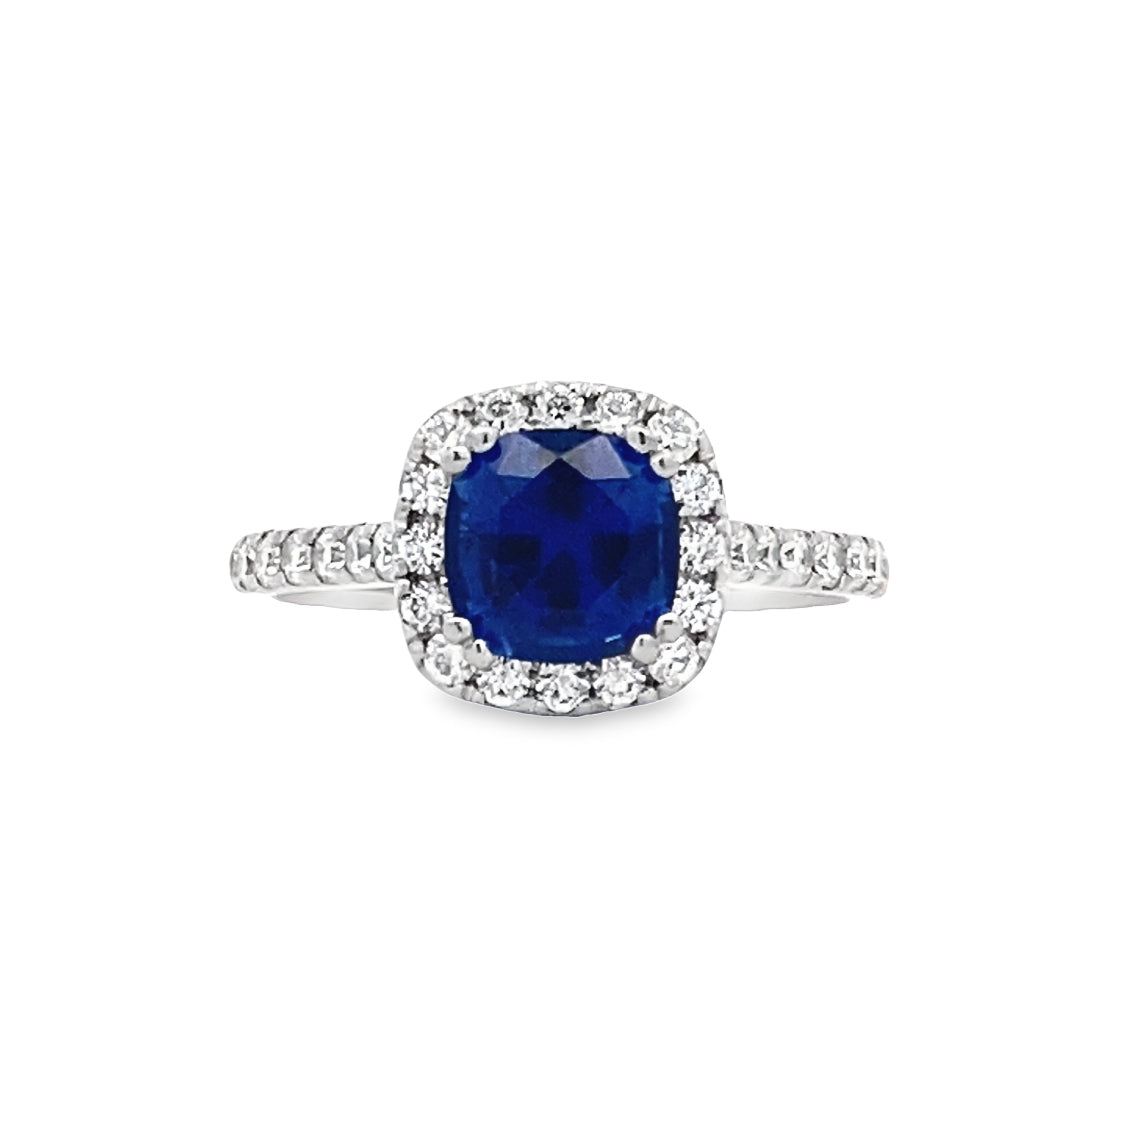 Beeghly & Co. Platinum Sapphire & Diamond Engagement Ring BCR-65